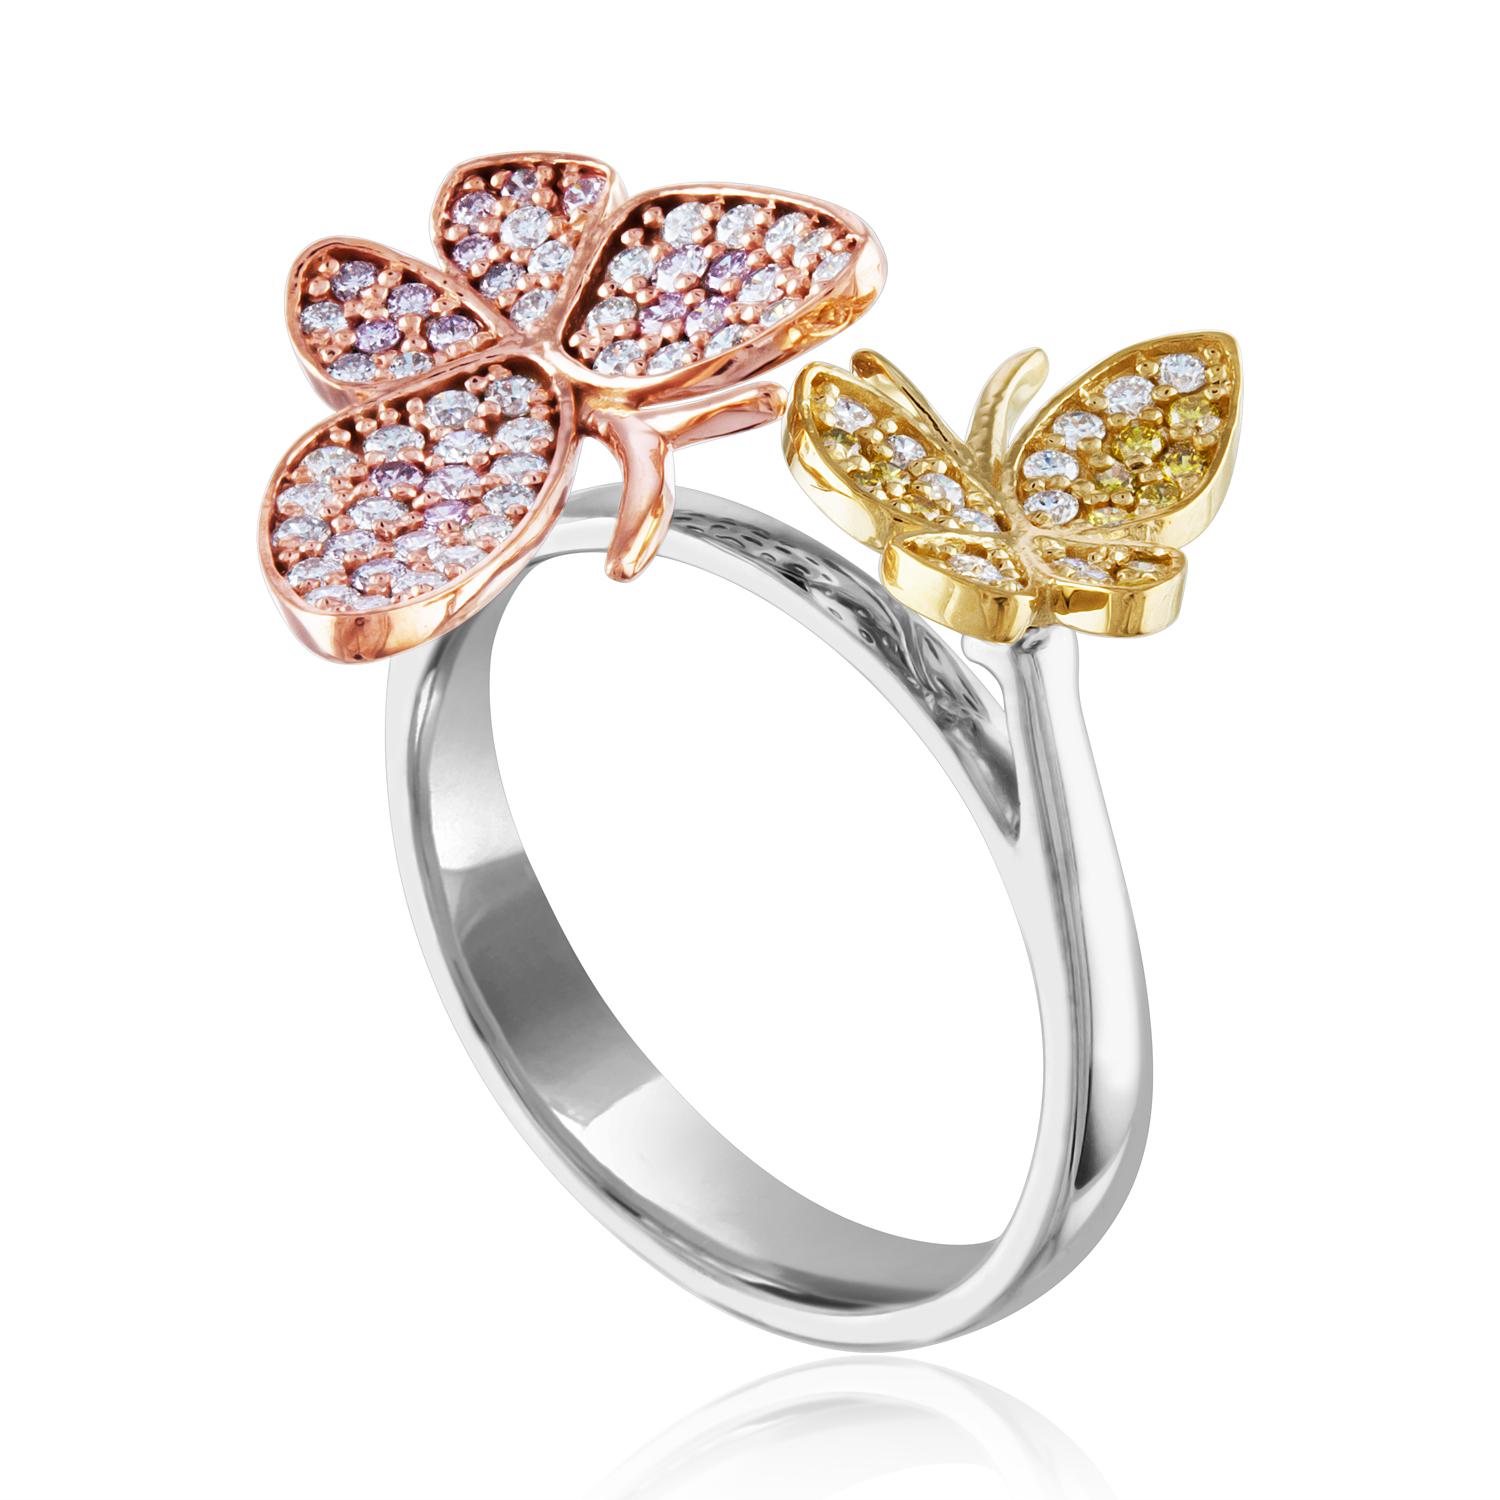 Unique One-Of-Kind Ring Tri-Color Natural Diamonds & Gold
The Bypass Butterfly Ring Natural Diamonds
The ring is 14K White and Yellow and Rose Gold
There are 0.33 Carats In White Diamonds F/G VS/SI
There are 0.14 Carats In Pink Diamonds VS/SI
There